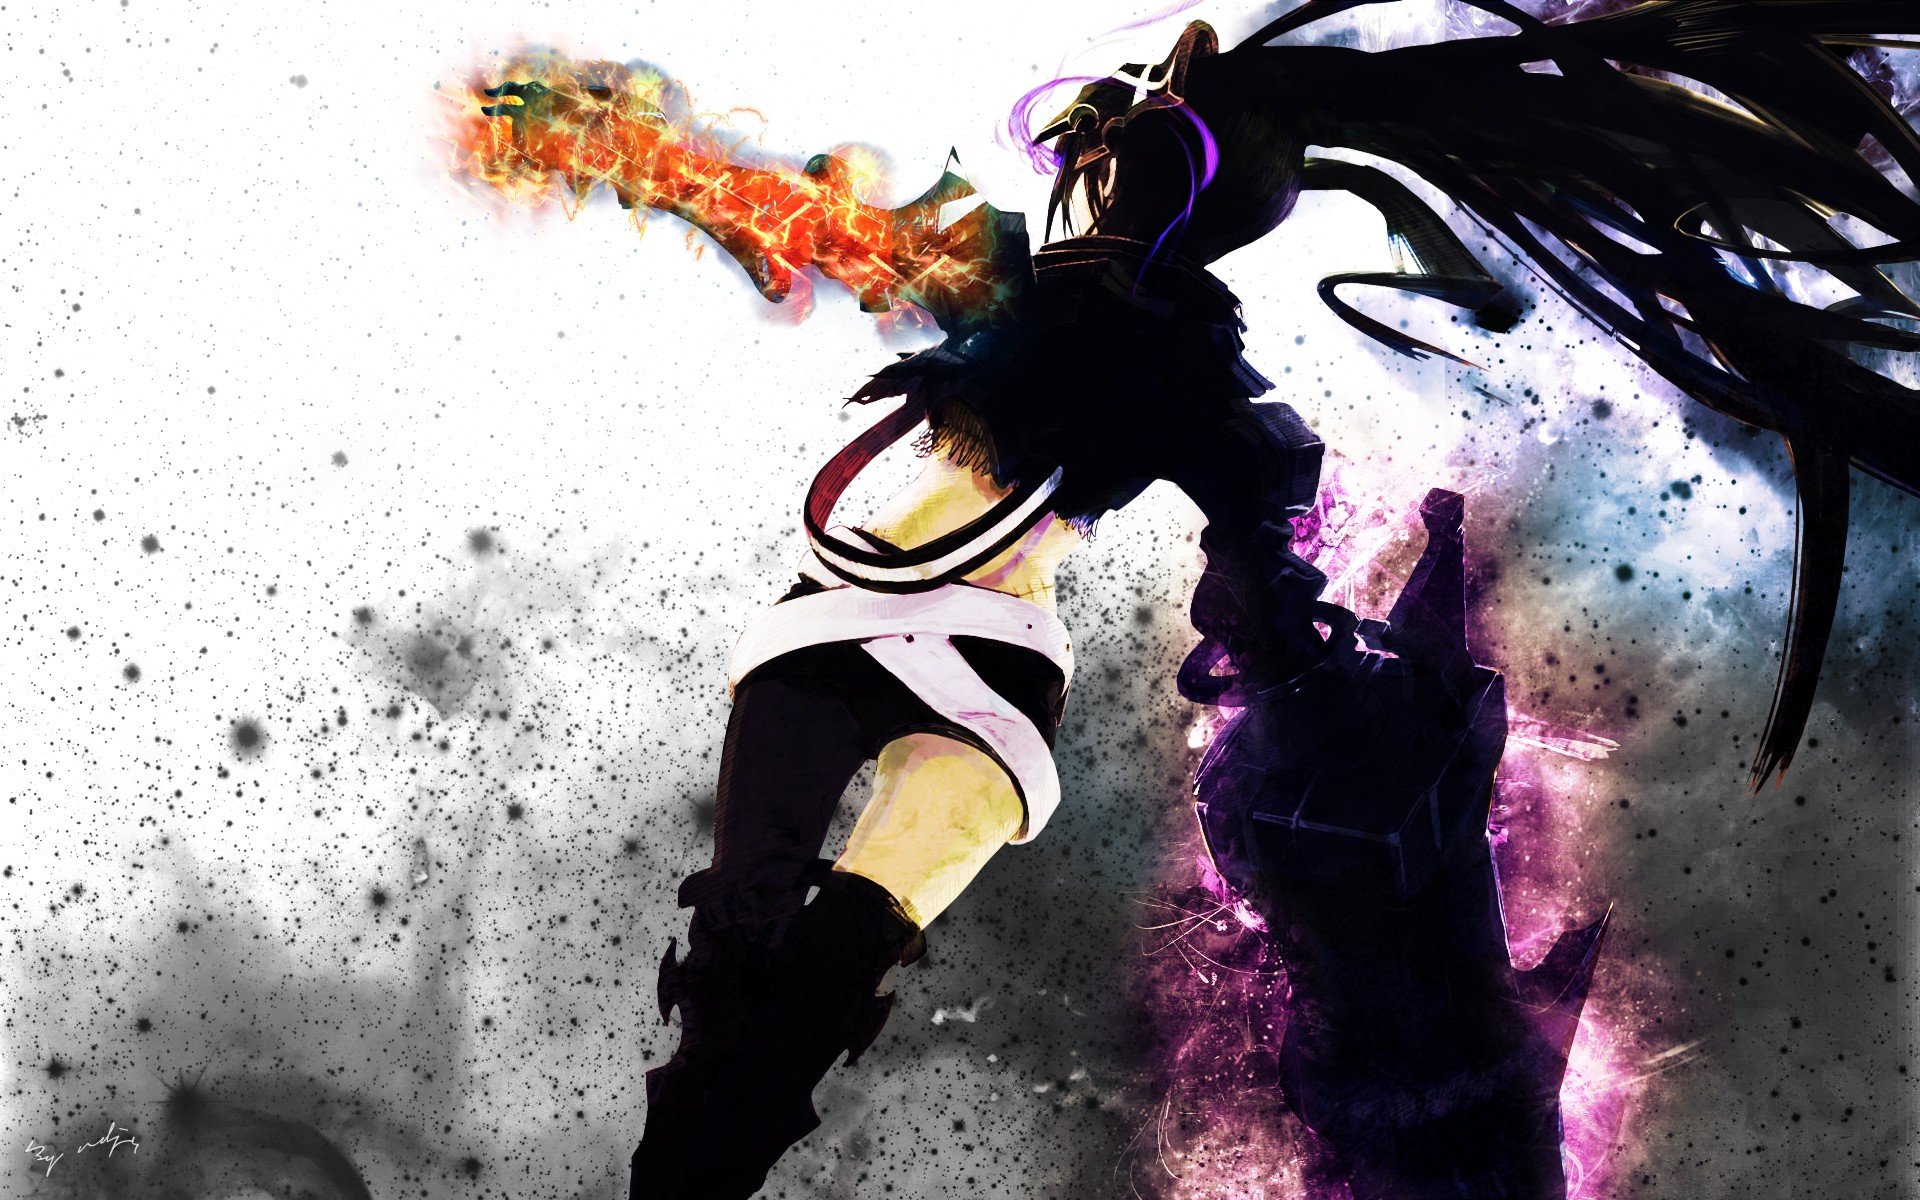 boots, Black, Rock, Shooter, Back, Fire, Long, Hair, Belts, Weapons, Armor, Twintails, Shorts, Anime, Girls, Insane, Black, Rock, Shooter, Swords, Hair, Ornaments, Black, Hair Wallpaper